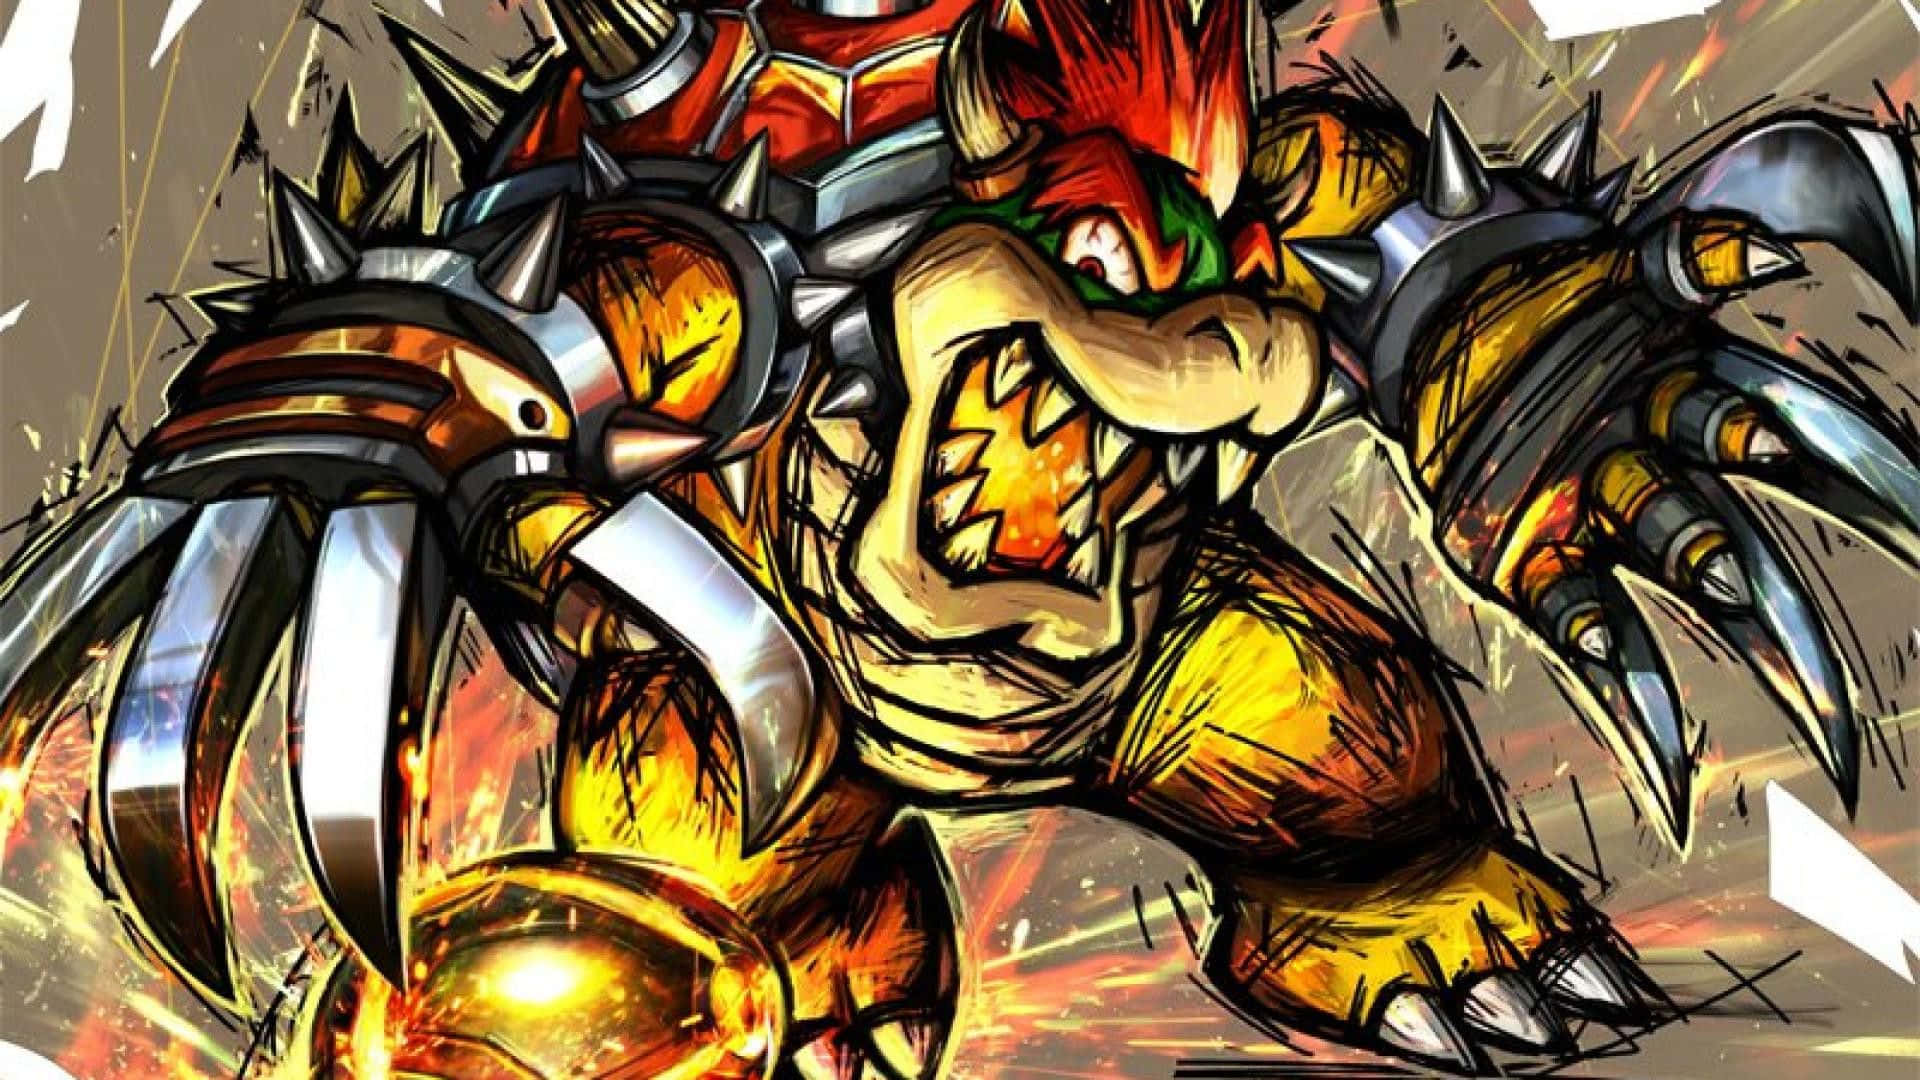 Bowser, the iconic video game villain, dominating the frame in fierce pose. Wallpaper